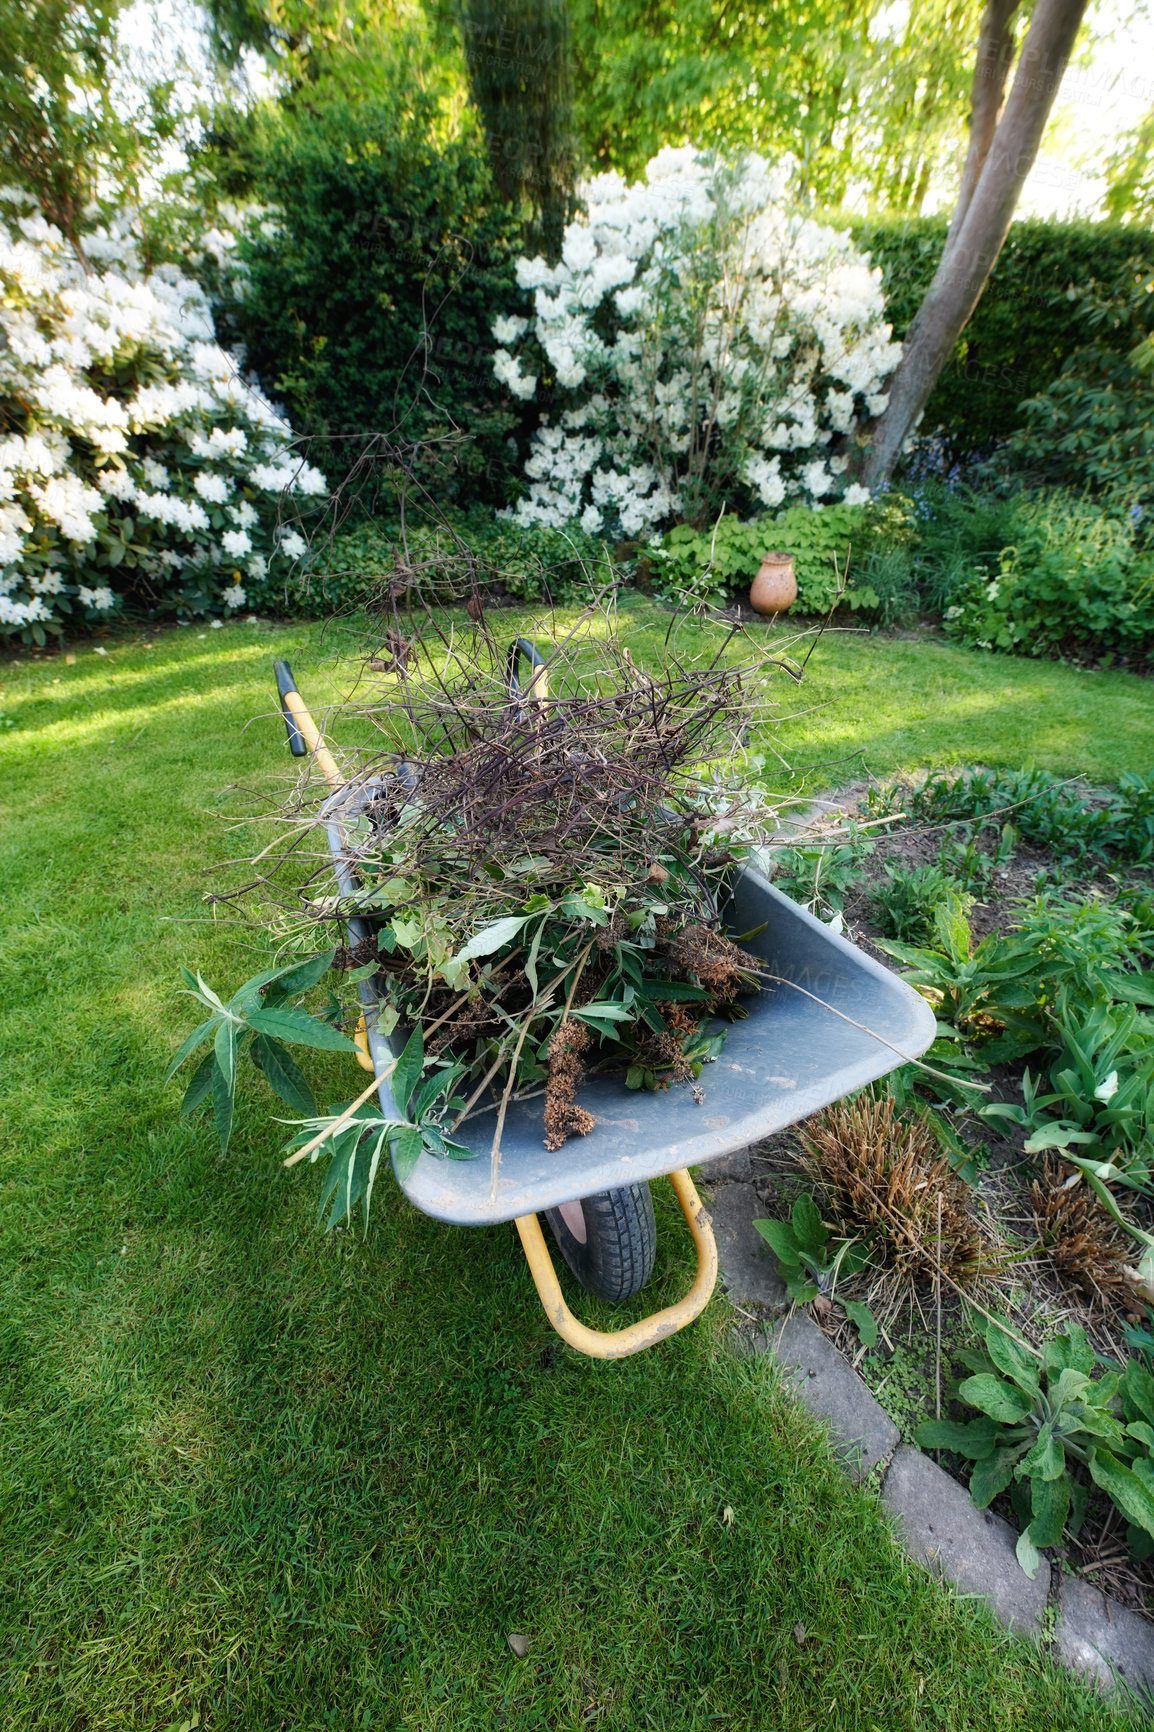 Buy stock photo Garden wheelbarrow full of twigs and broken branches while landscaping a home backyard. Equipment tools ready to carry and transport soil, manure, compost and fertilizer. Finished cleaning up a yard